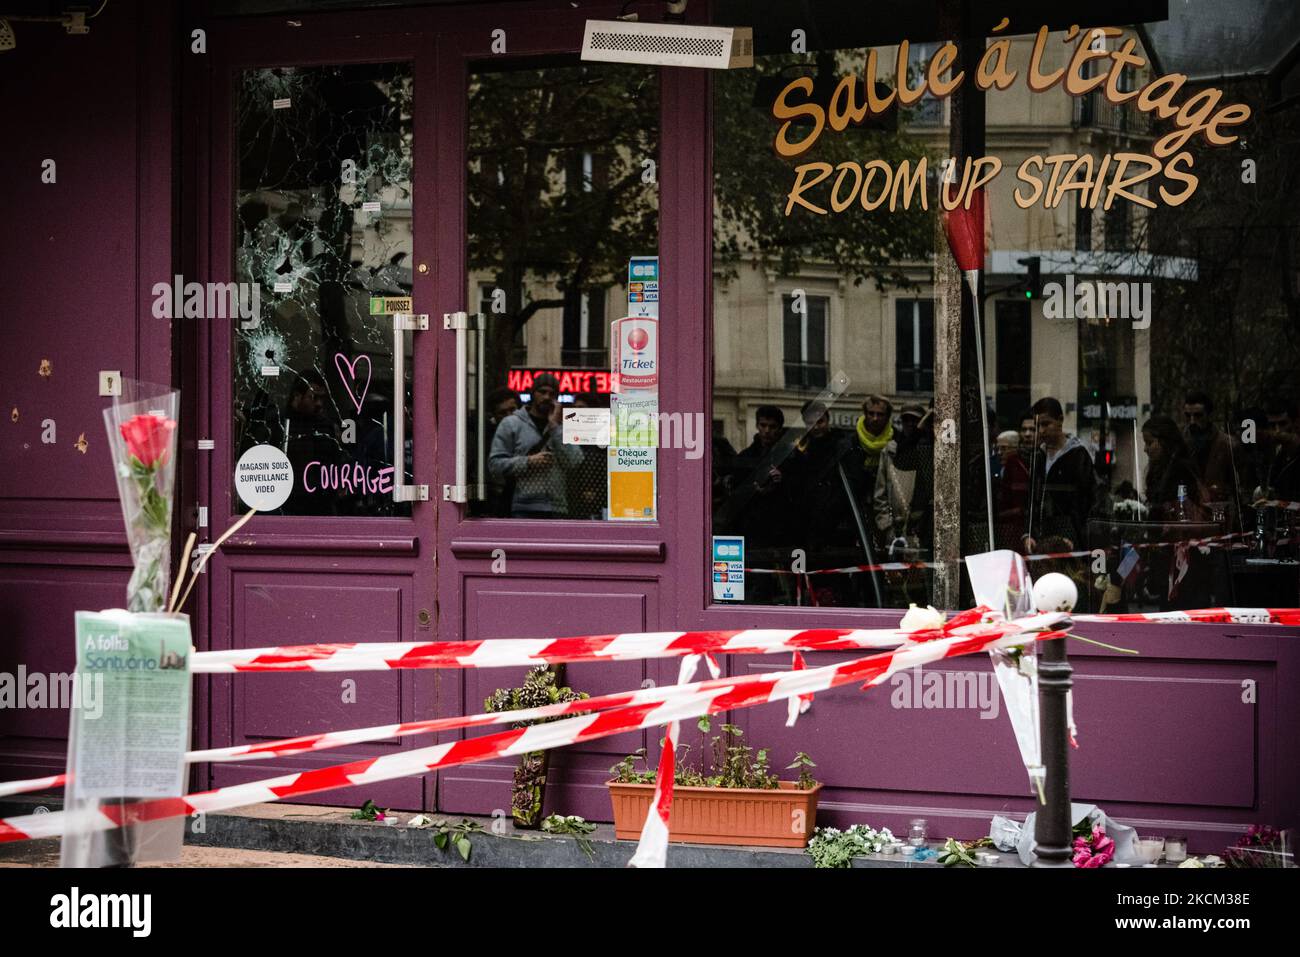 On November 16, 2015, three days after the attacks of November 13, 2015 that killed 130 people and injured more than 400 in a series of attacks that hit several places in Paris including the Stade de France, cafe terraces and the Bataclan concert hall the emotion is at its peak in the streets of Paris, as here in front of the terrace of the restaurant 'Casa Nostra' where passersby gather and lay flowers, candles and messages in tribute to the victims in front of one of the places of the attacks still marked by the impact of bullets. (Photo by Samuel Boivin/NurPhoto) Stock Photo